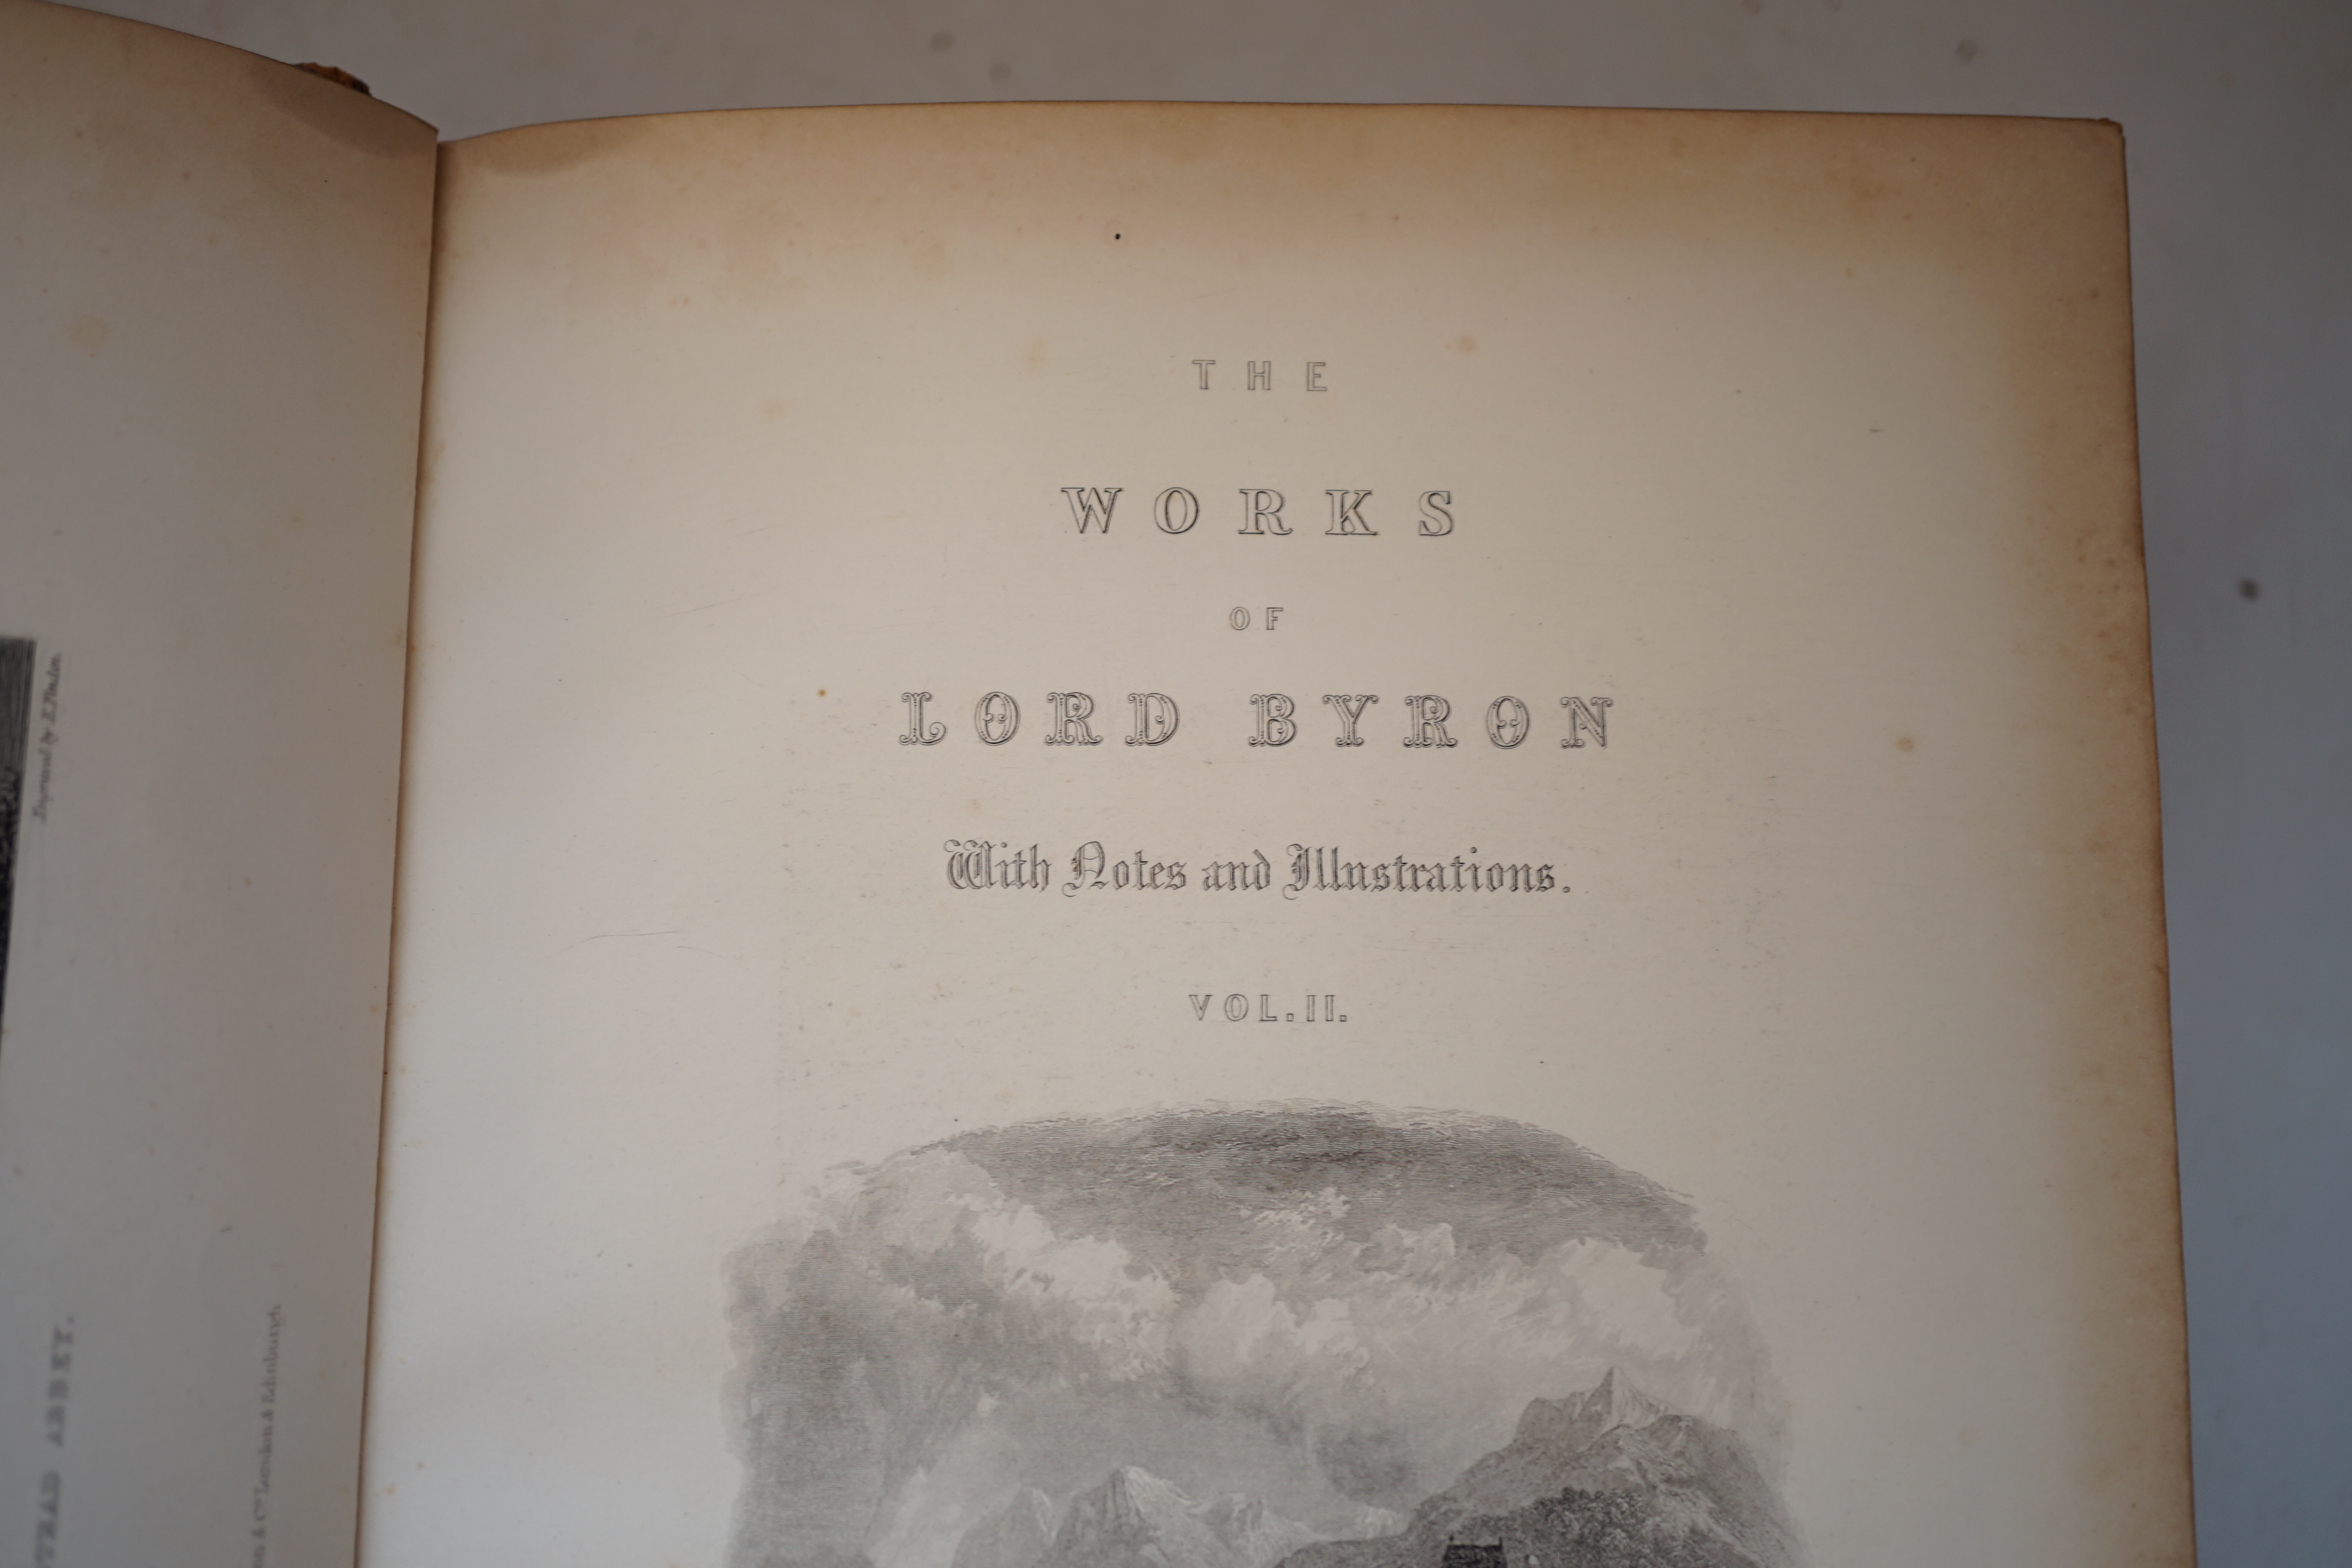 Byron, George Gordon Noel, Lord - The Works of Lord Byron: with a Life and Illustrative Notes, by William Anderson, 2 vols, 8vo, with portrait frontispiece and 58 engravings, half red morocco, A. Fullerton, Edinburgh, c.